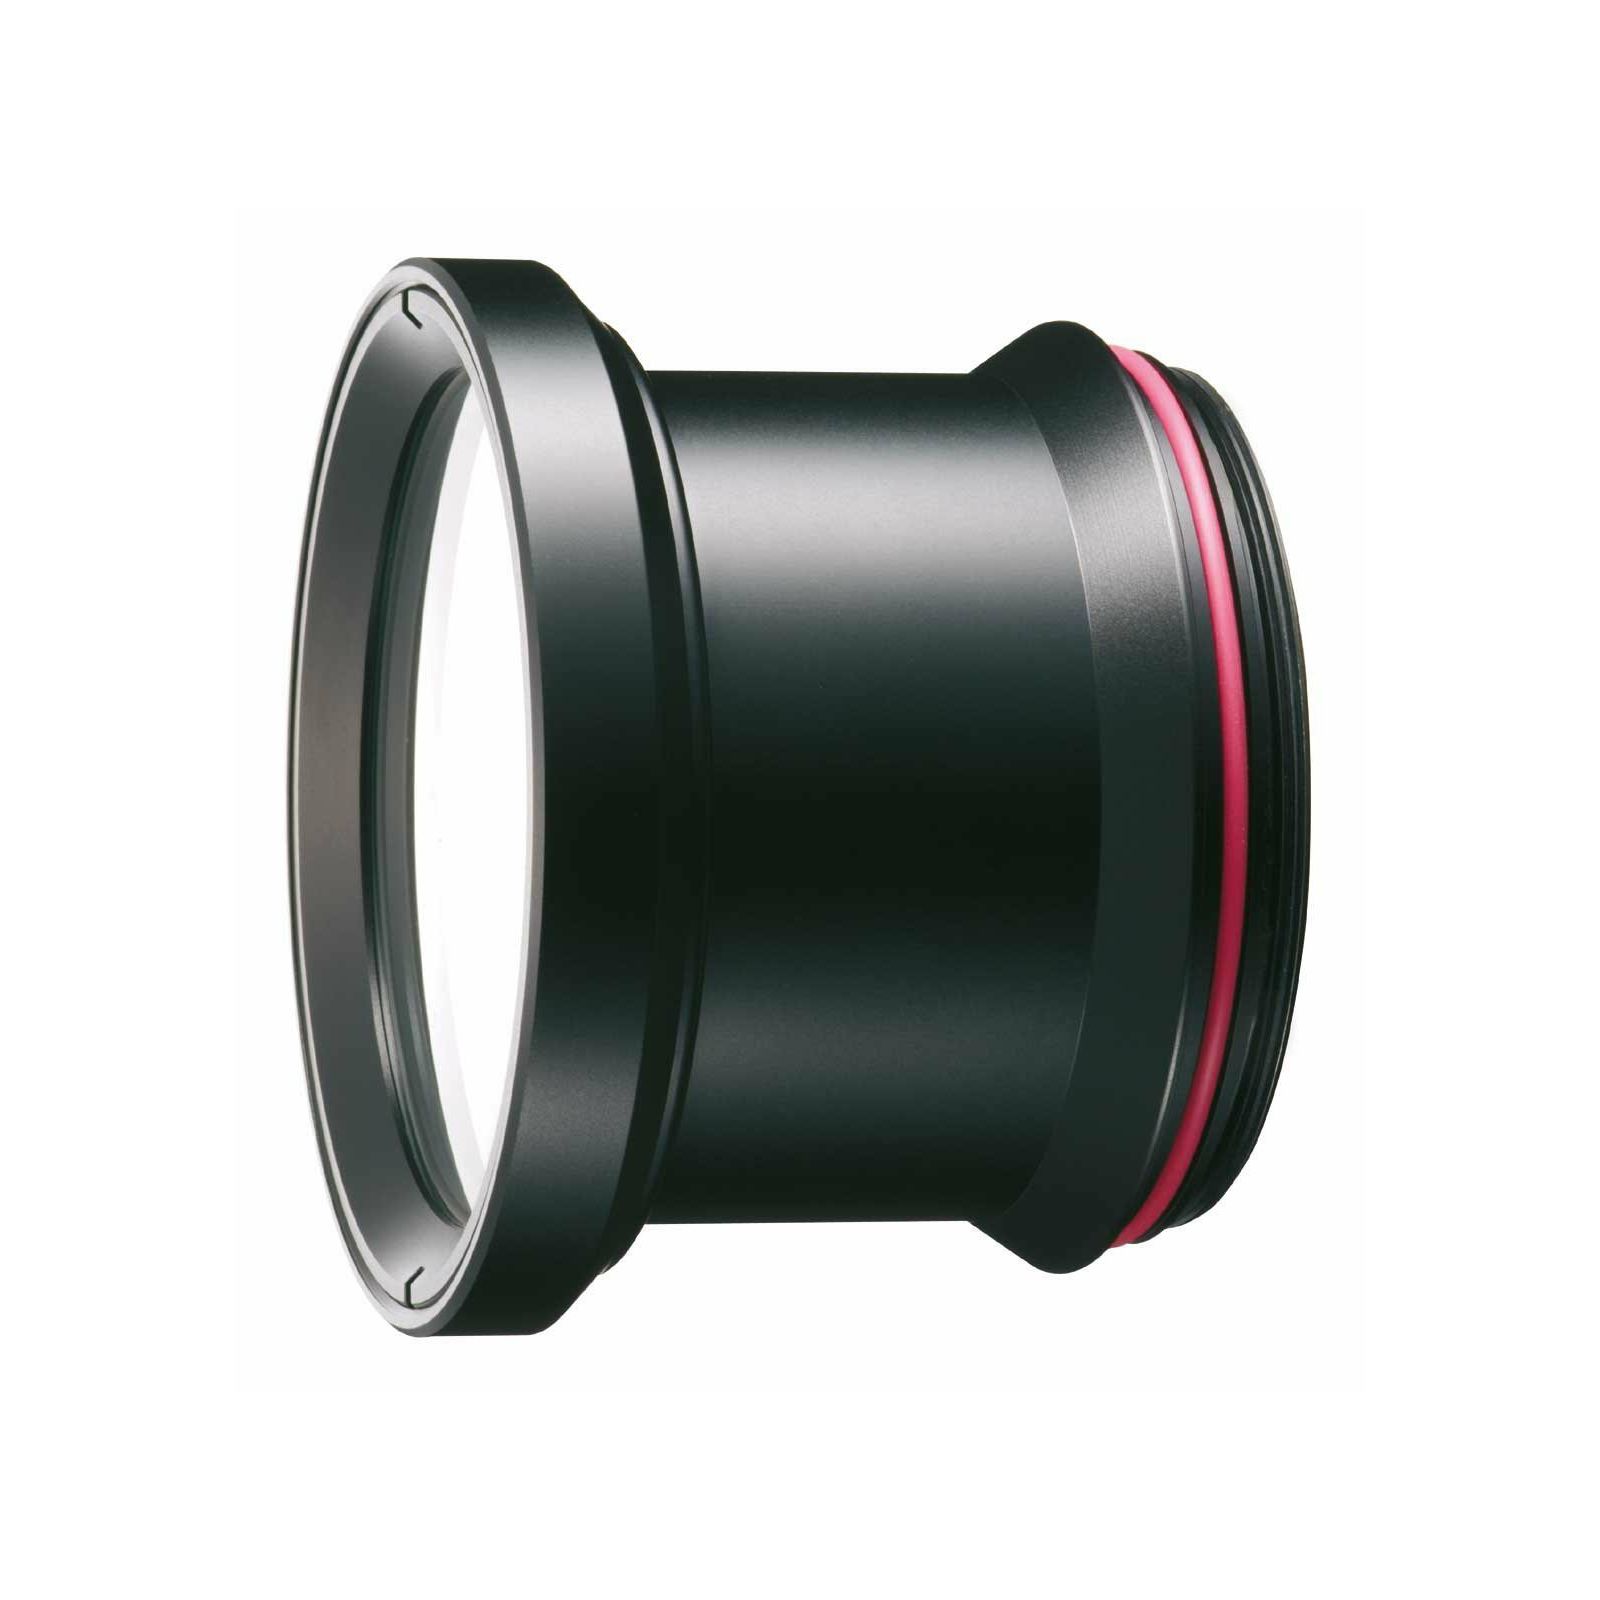 Olympus PPO-E01 Lens Port for 14-45mm/ 35mm macro Underwater Accessory N2134600